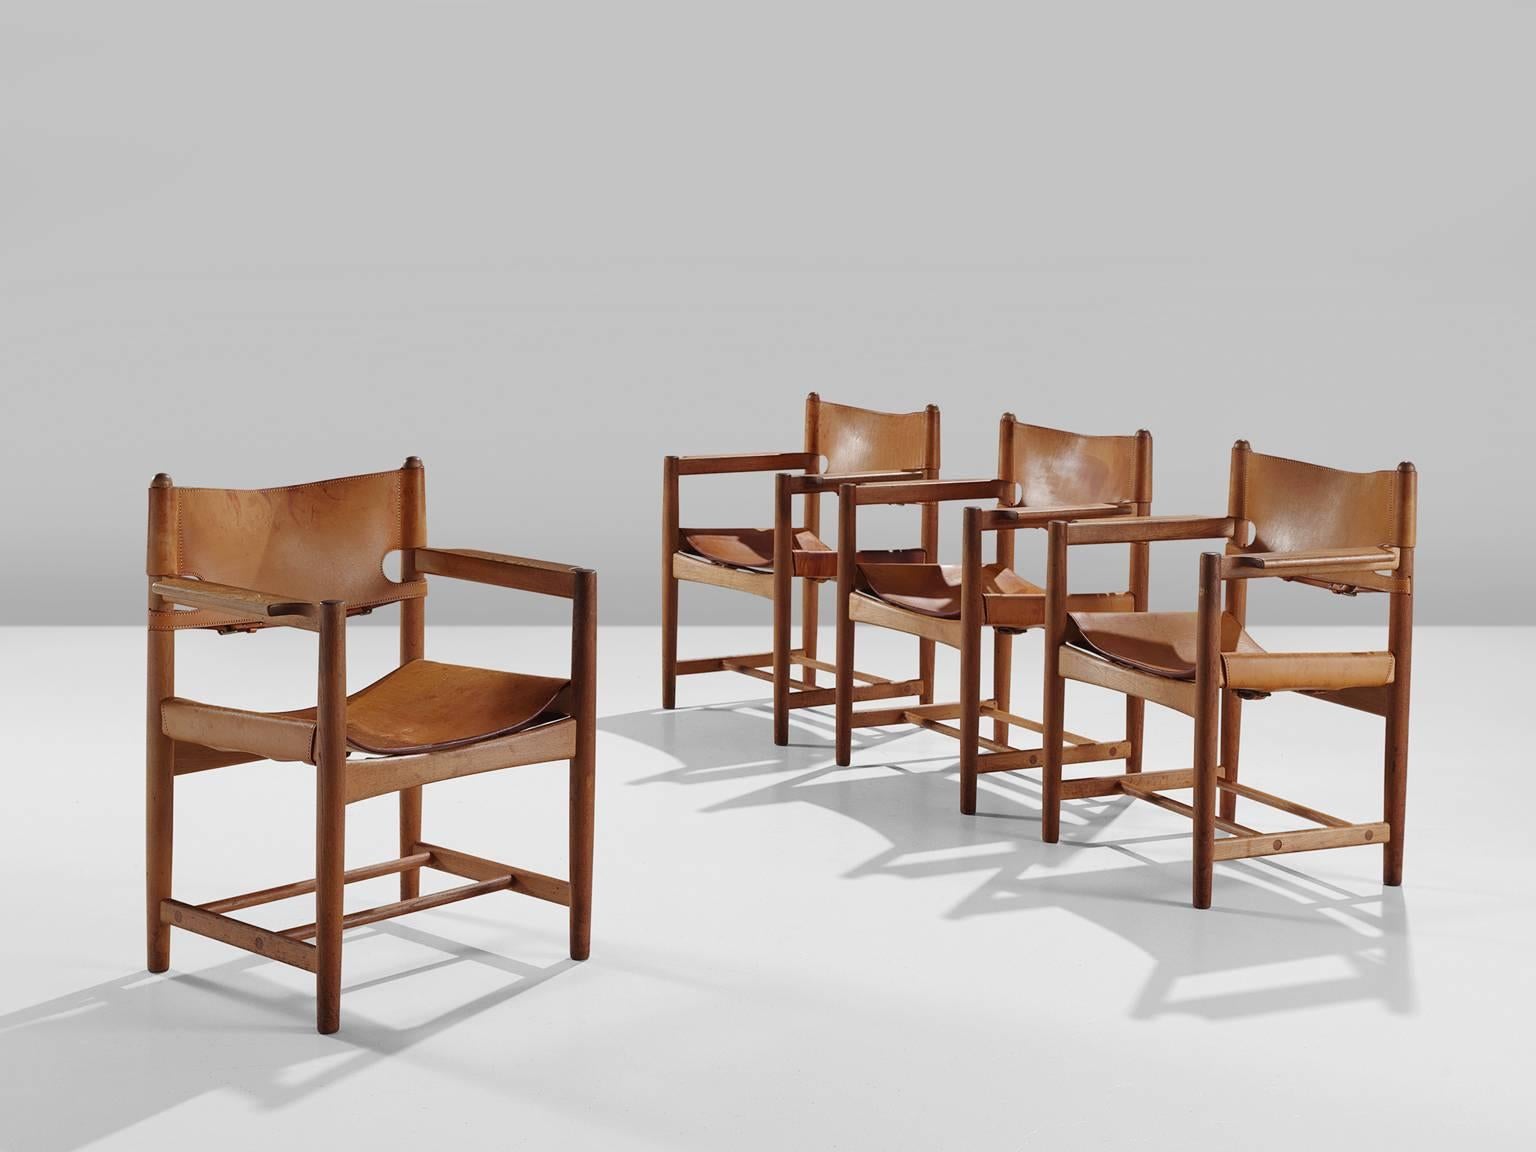 Set of four armchairs model 238, in oak and light beige cognac leather by Børge Mogensen for Fredericia Stolefabrik, Denmark, 1964. 

Set of four armchairs in solid oak. These chairs remind of the classical foldable 'director-chairs', yet this